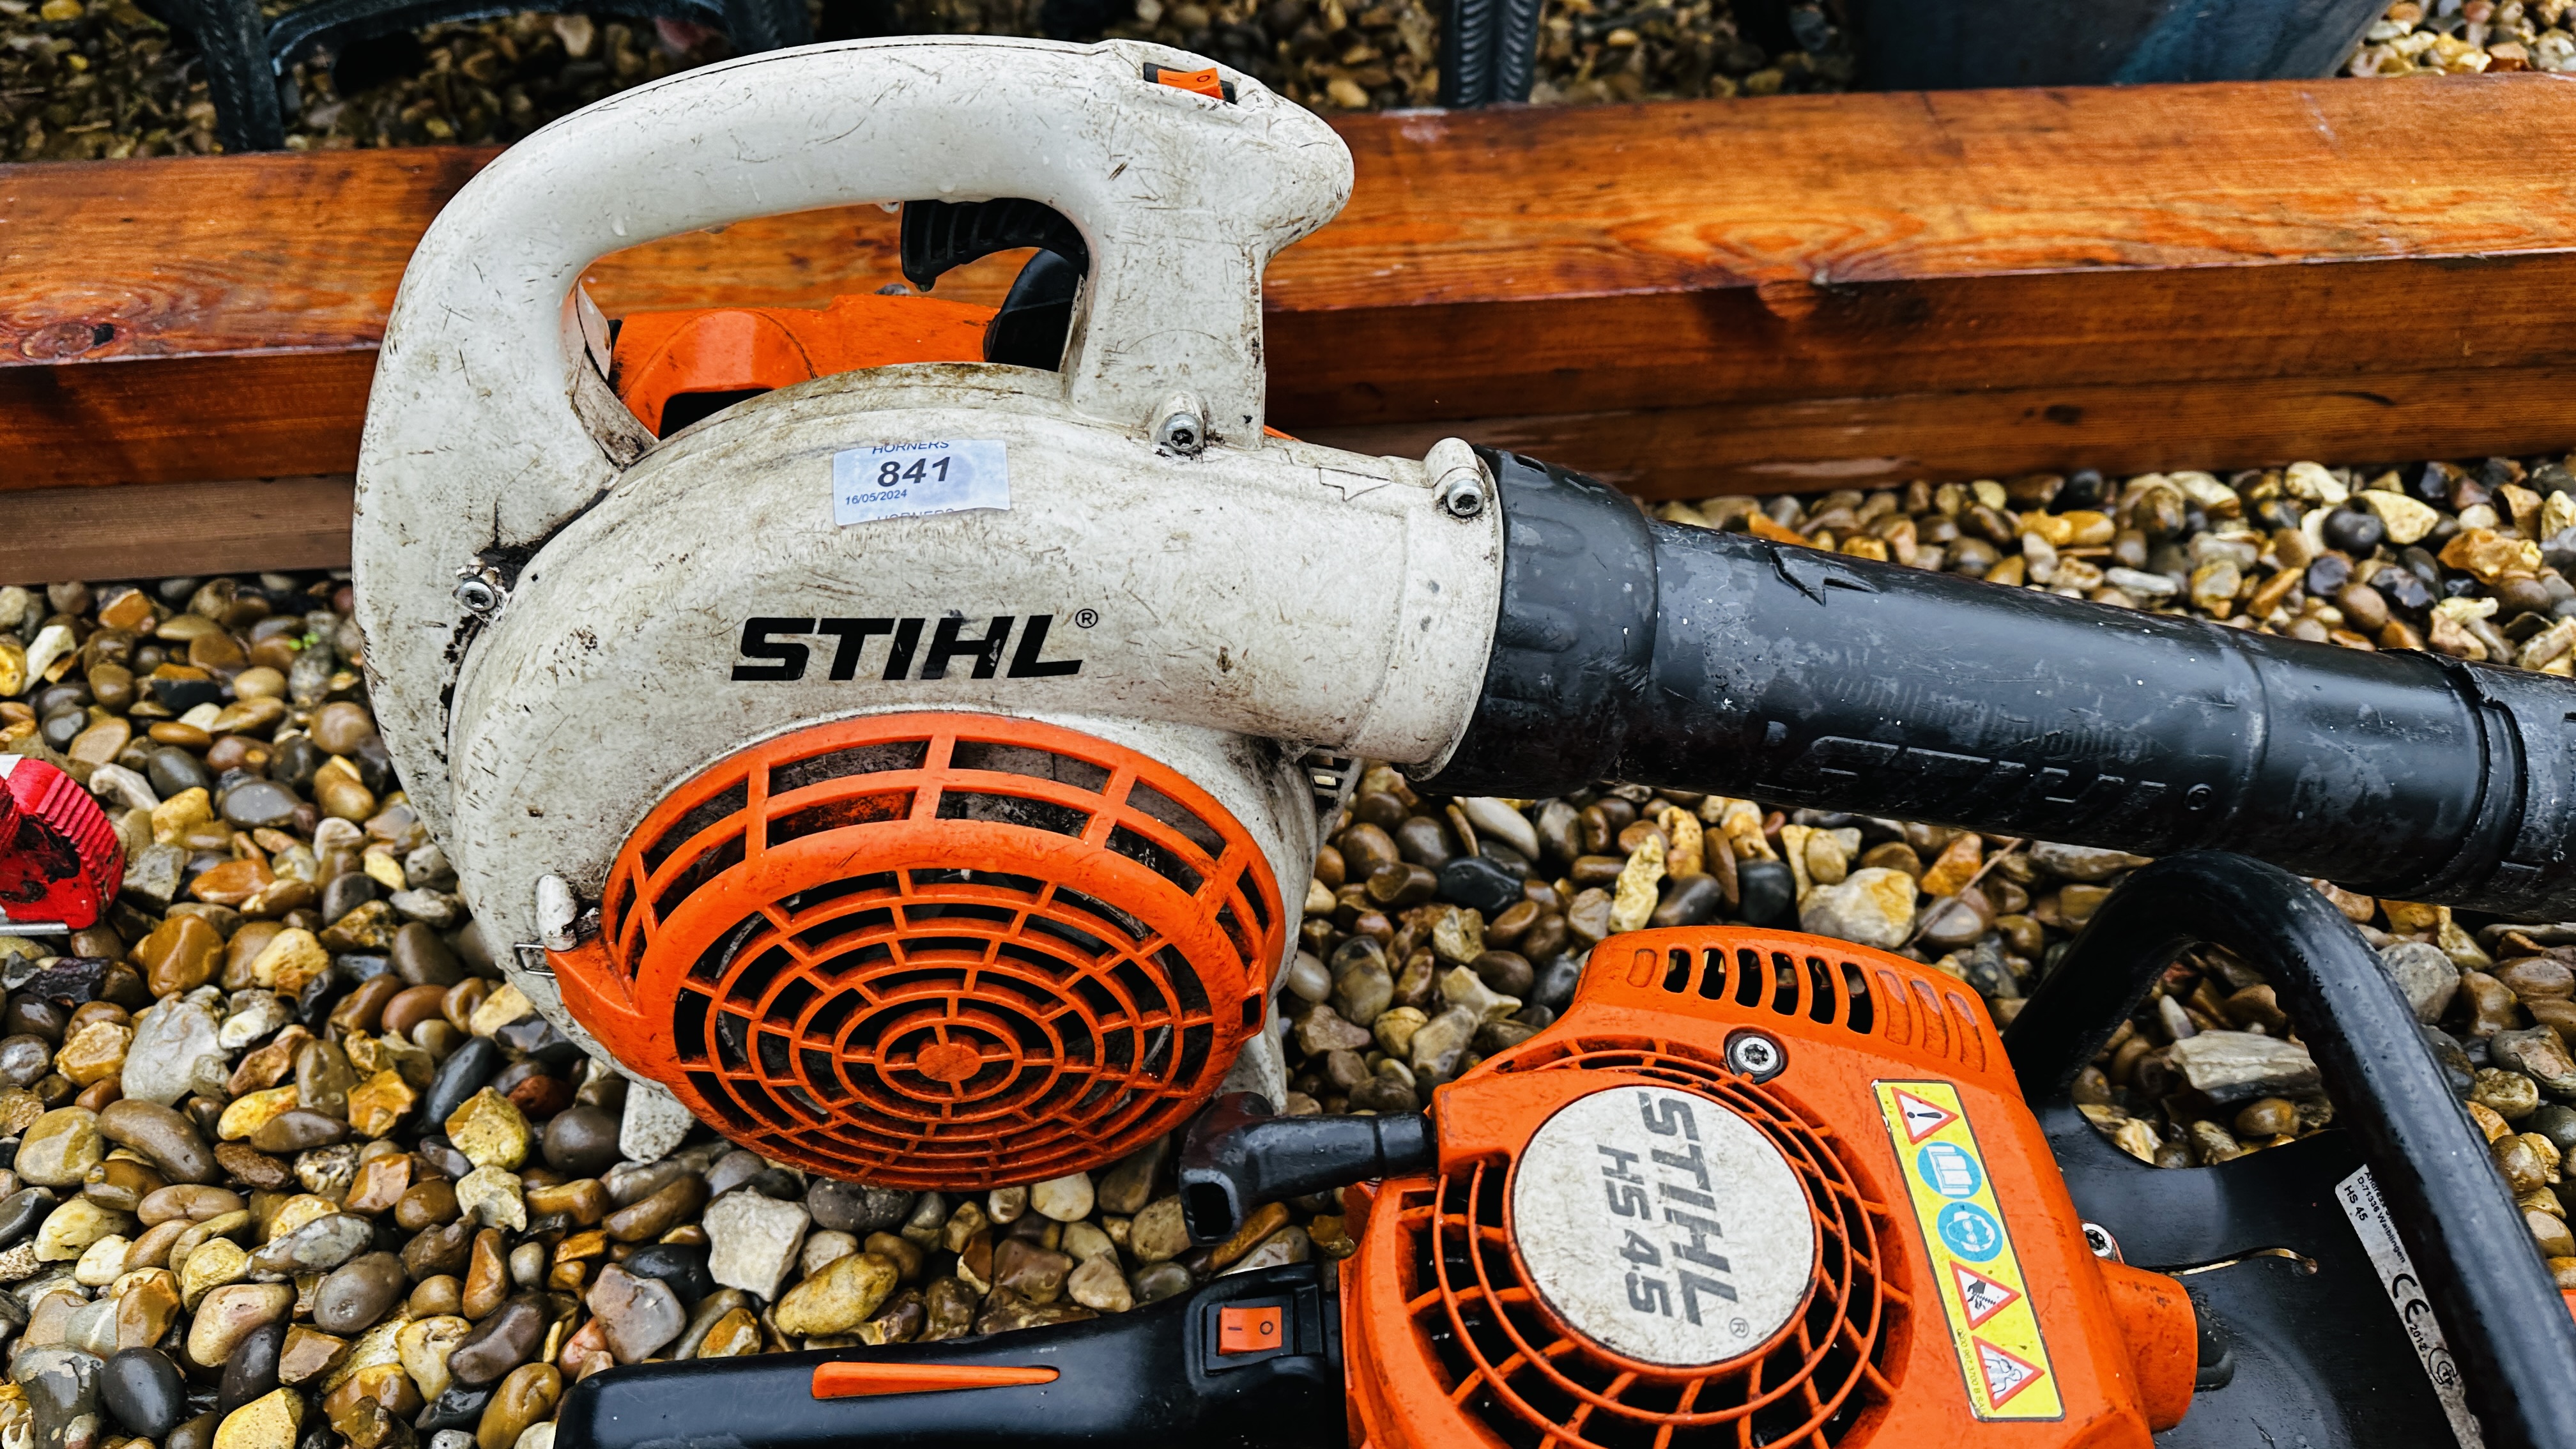 STIHL PETROL DRIVEN GARDEN BLOWER AND STIHL HS45 PETROL DRIVEN HEDGE TRIMMER - AS CLEARED, - Image 5 of 8